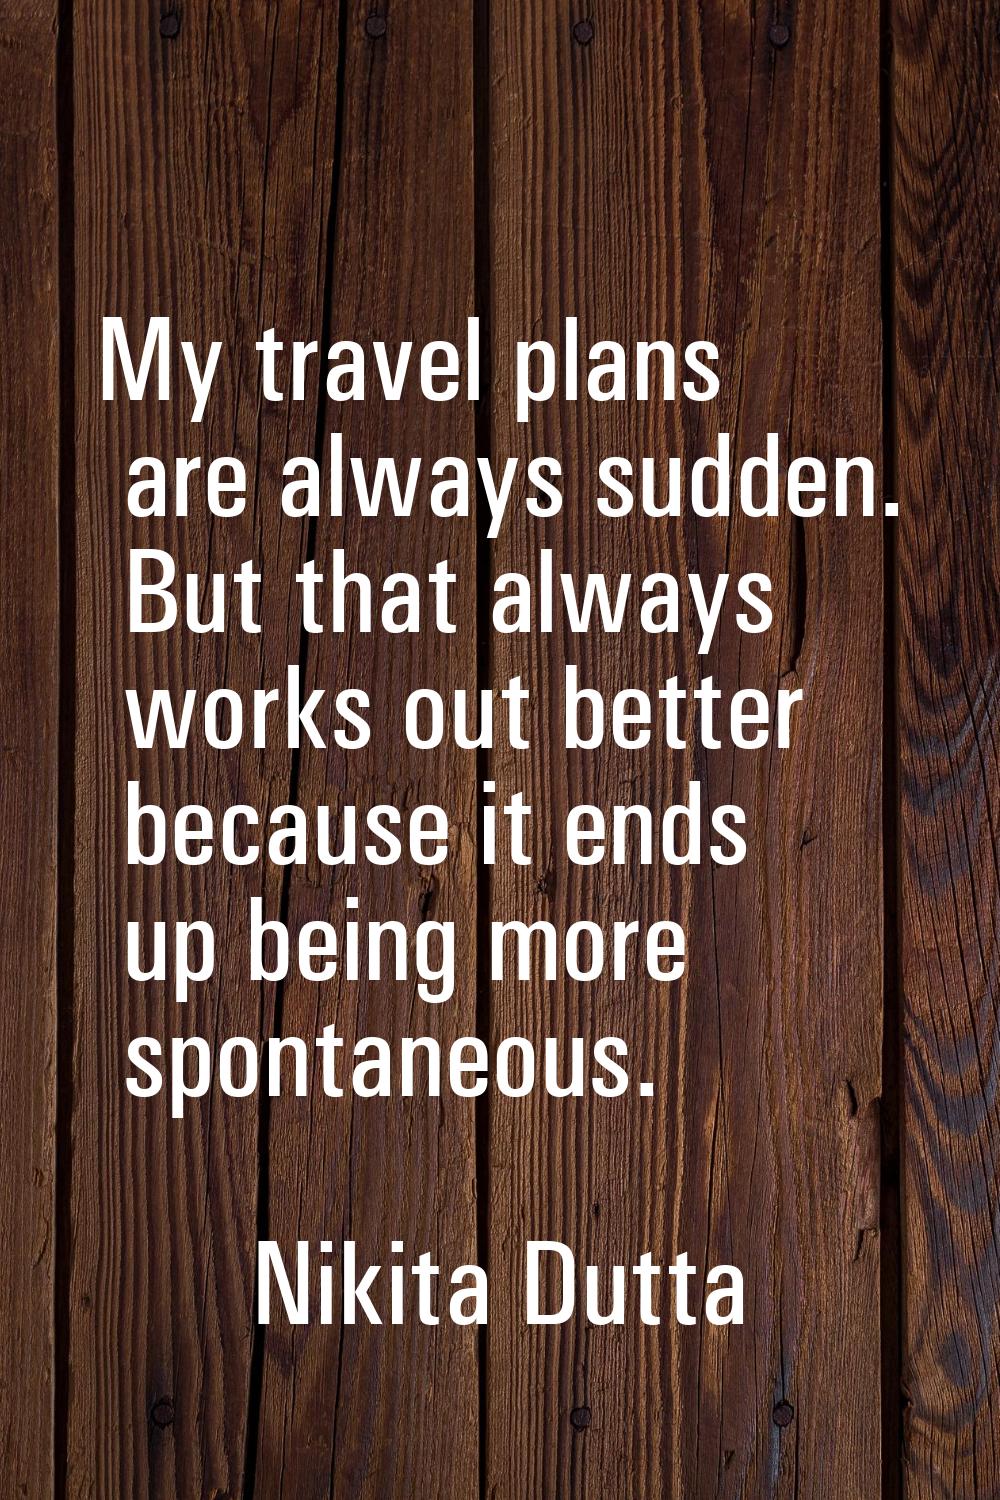 My travel plans are always sudden. But that always works out better because it ends up being more s